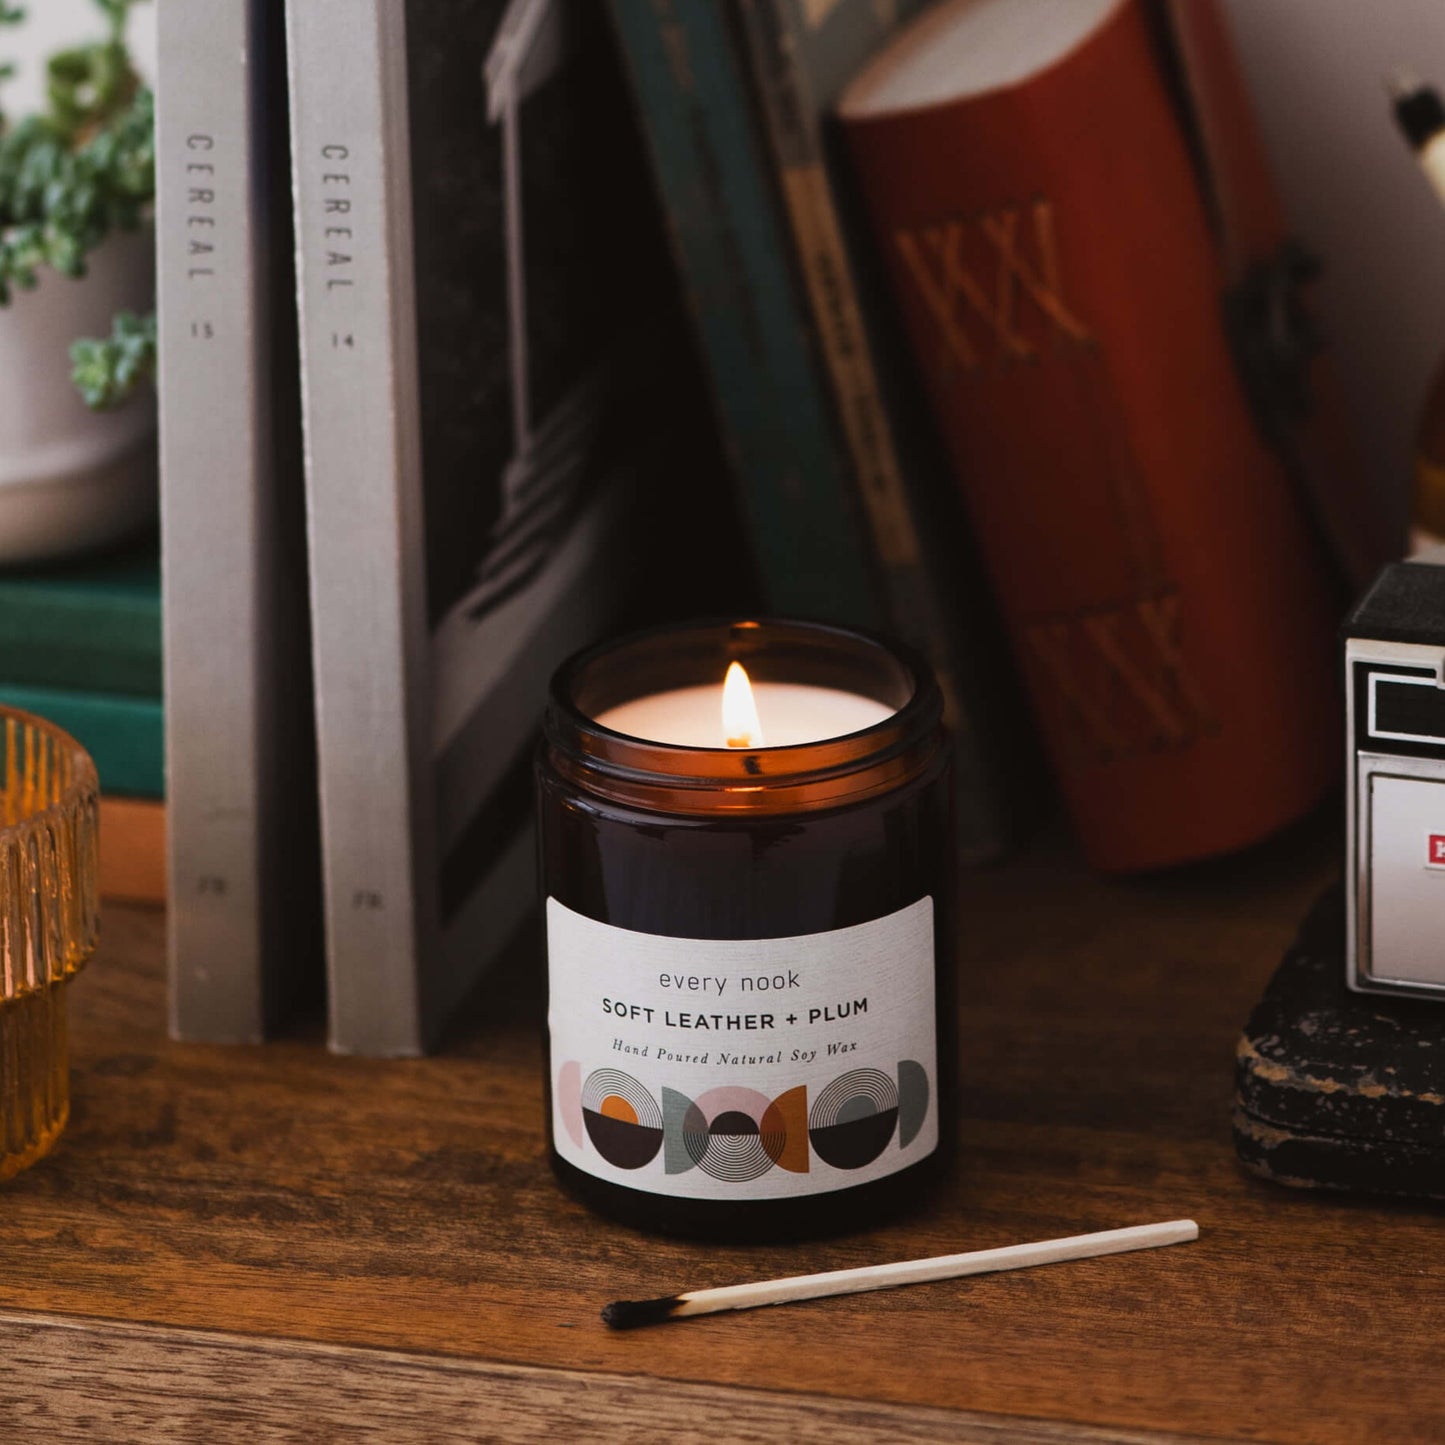 Soft Leather + Plum scented candle